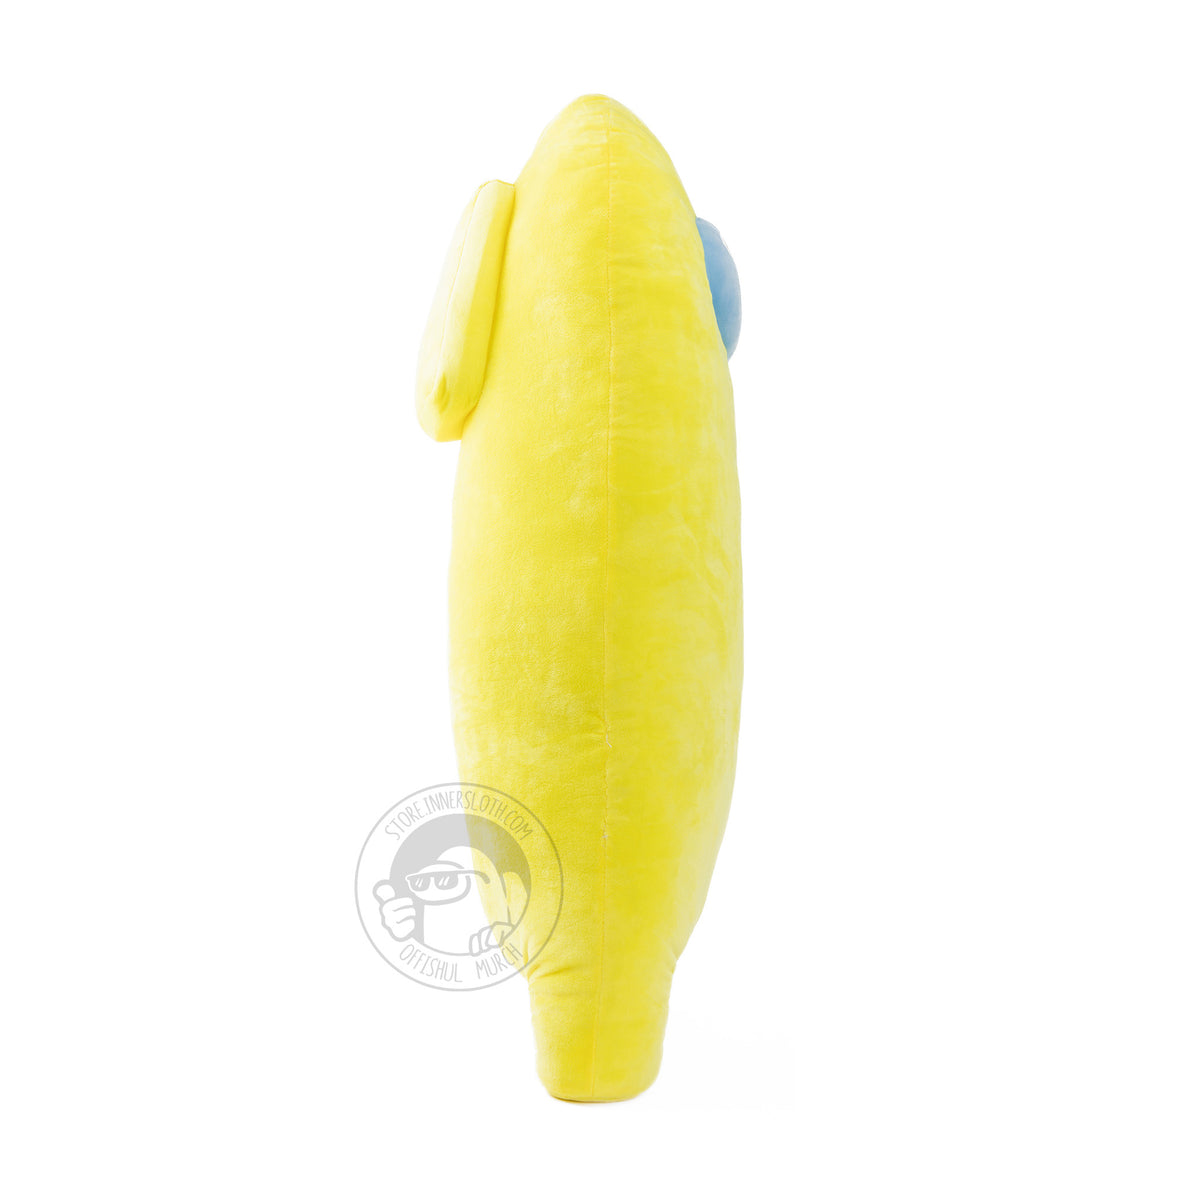 A right facing, side-view, photo of the Yellow Longbean on a white background